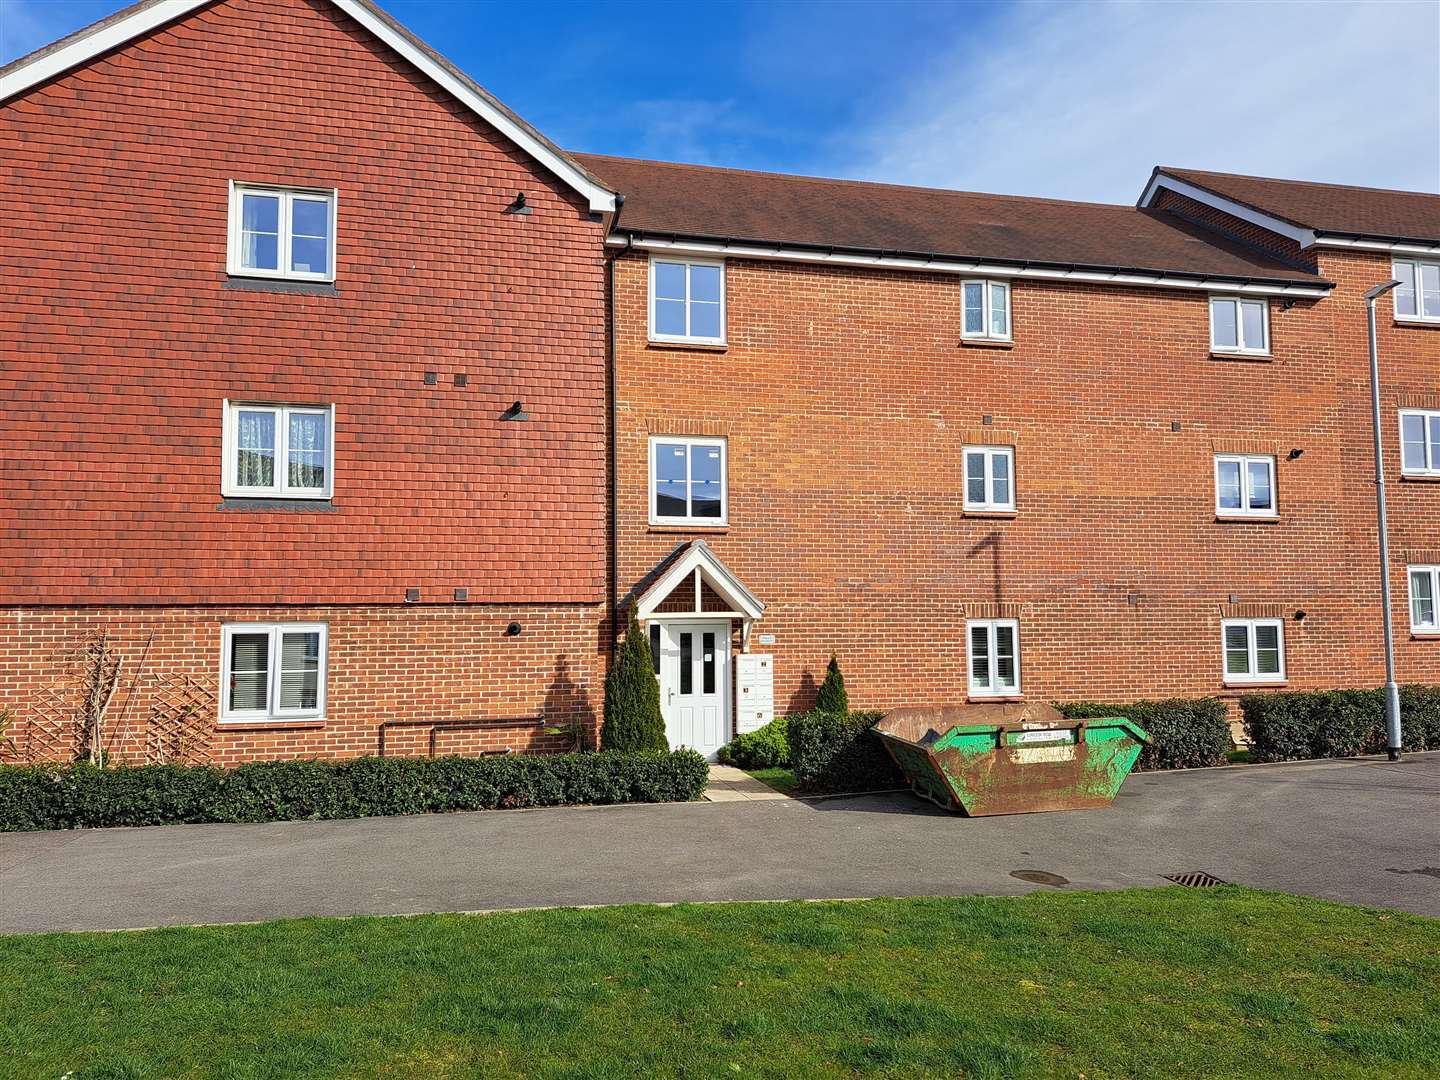 The Rolfes have a ground floor flat in Oaken Drive, Barming